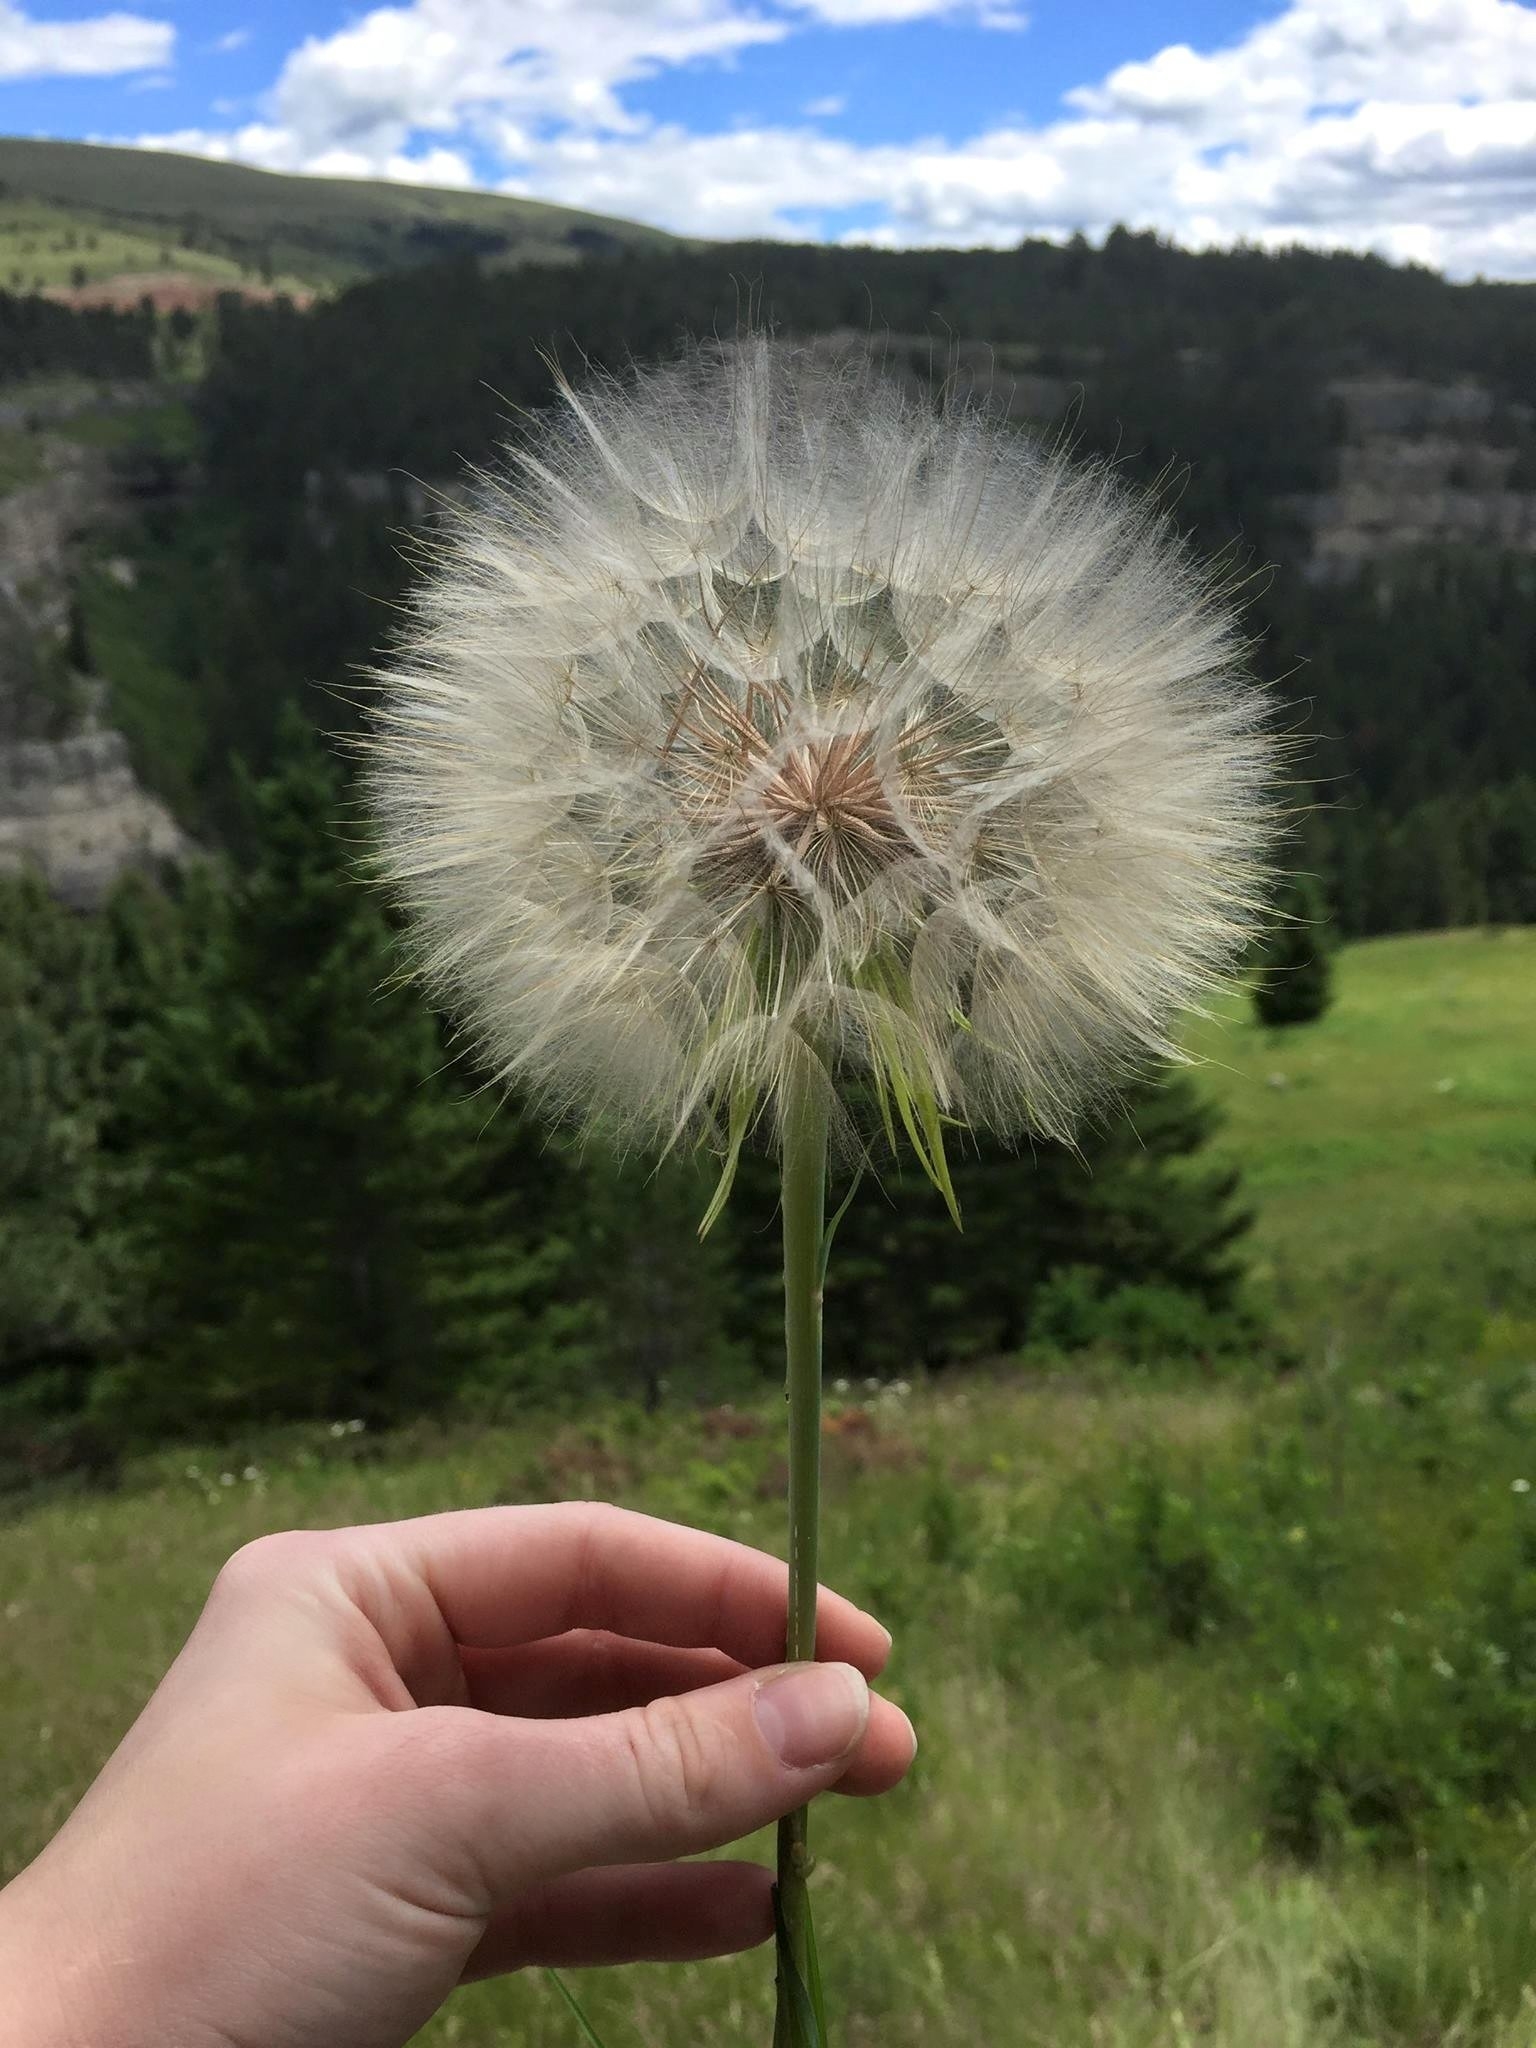 Close-up of a hand holding a large dandelion seed head with a grassy field and trees in the background